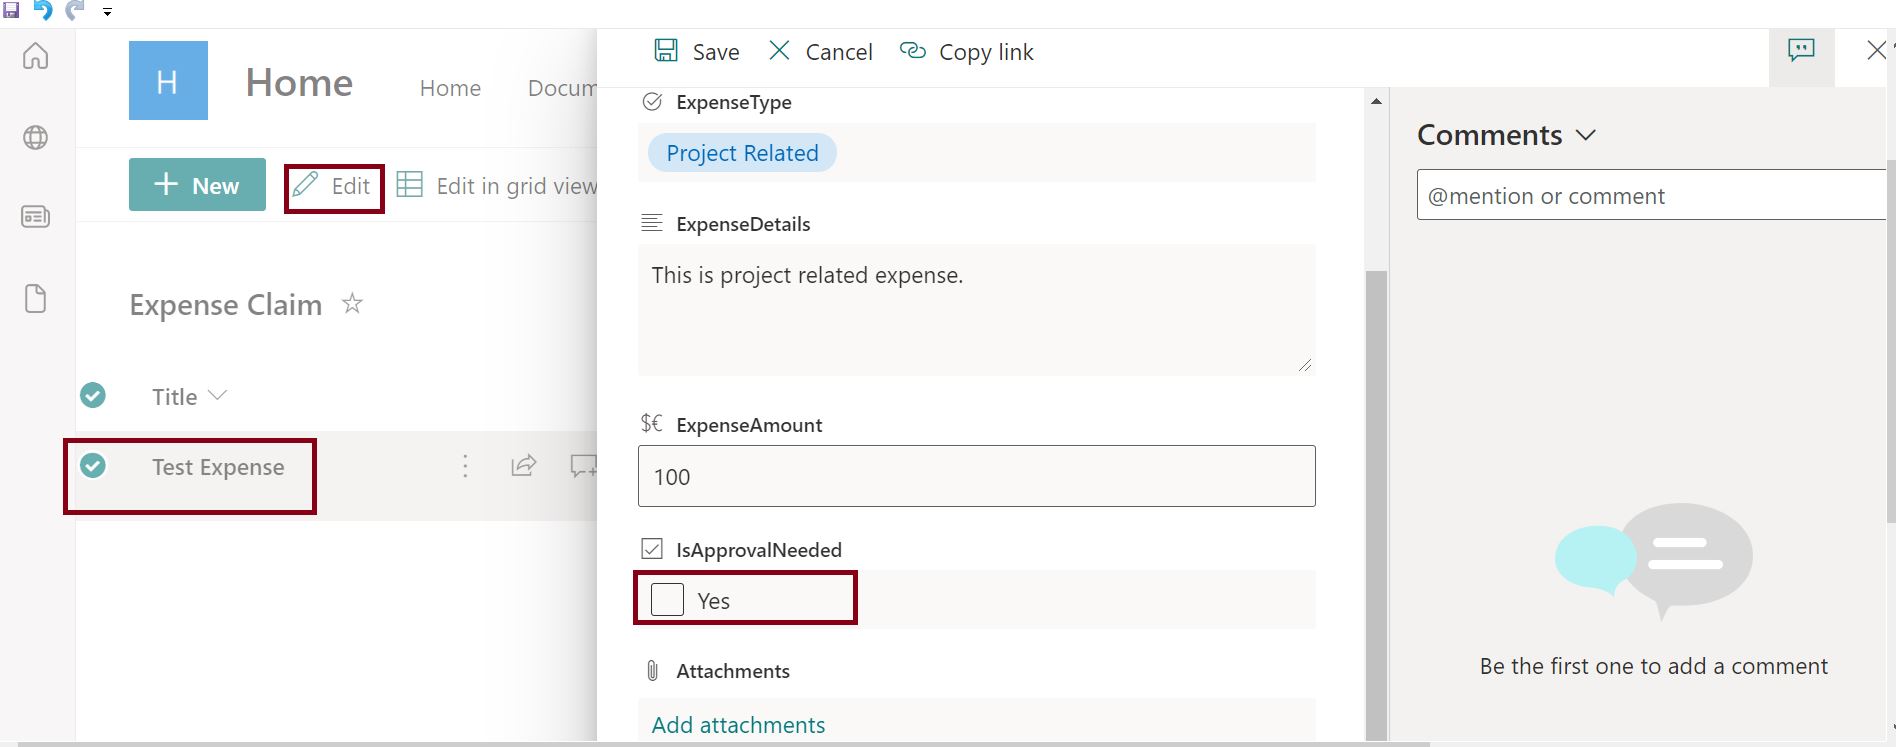 Conditionally show or hide columns in a SharePoint list, Open SharePoint list form in edit mode to show and hide the column